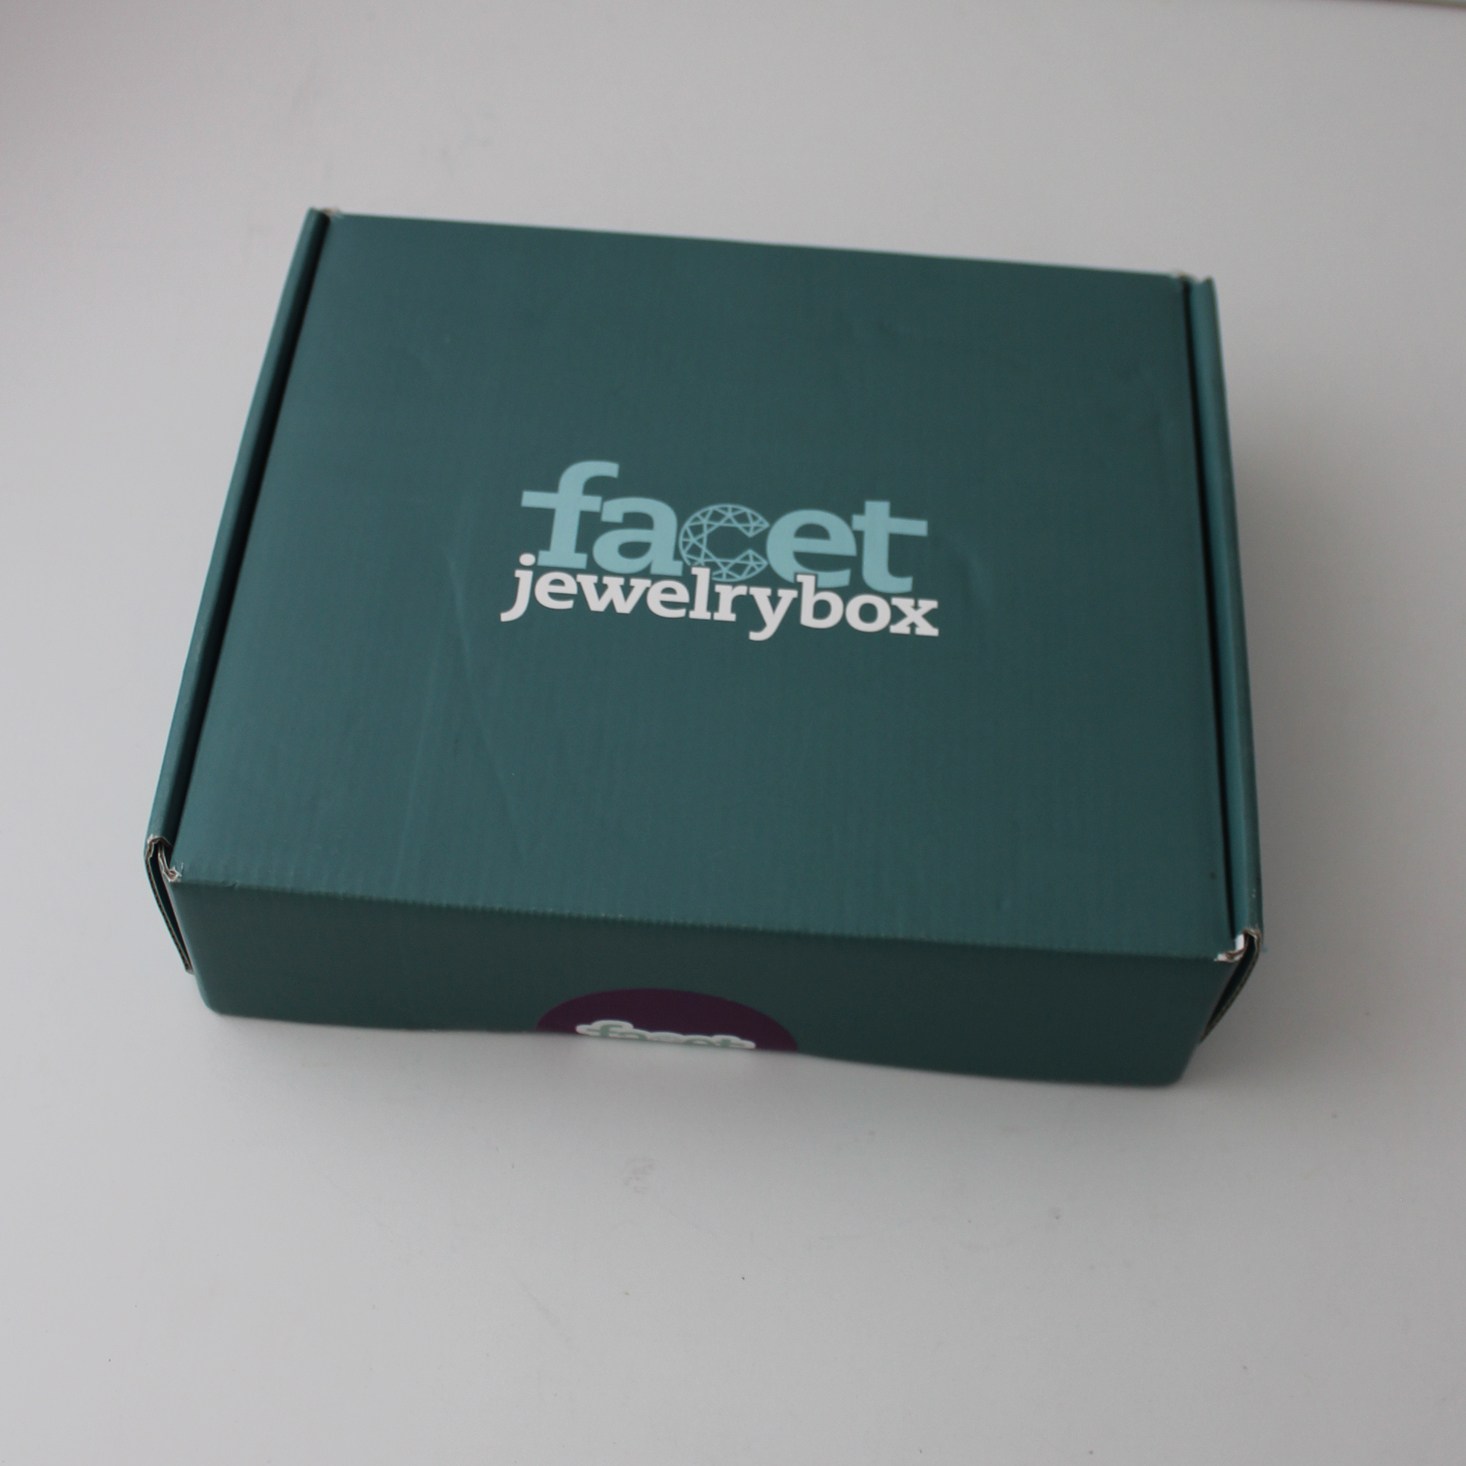 Facet Jewelry Box Bead Stringing Review + Coupon – August 2018